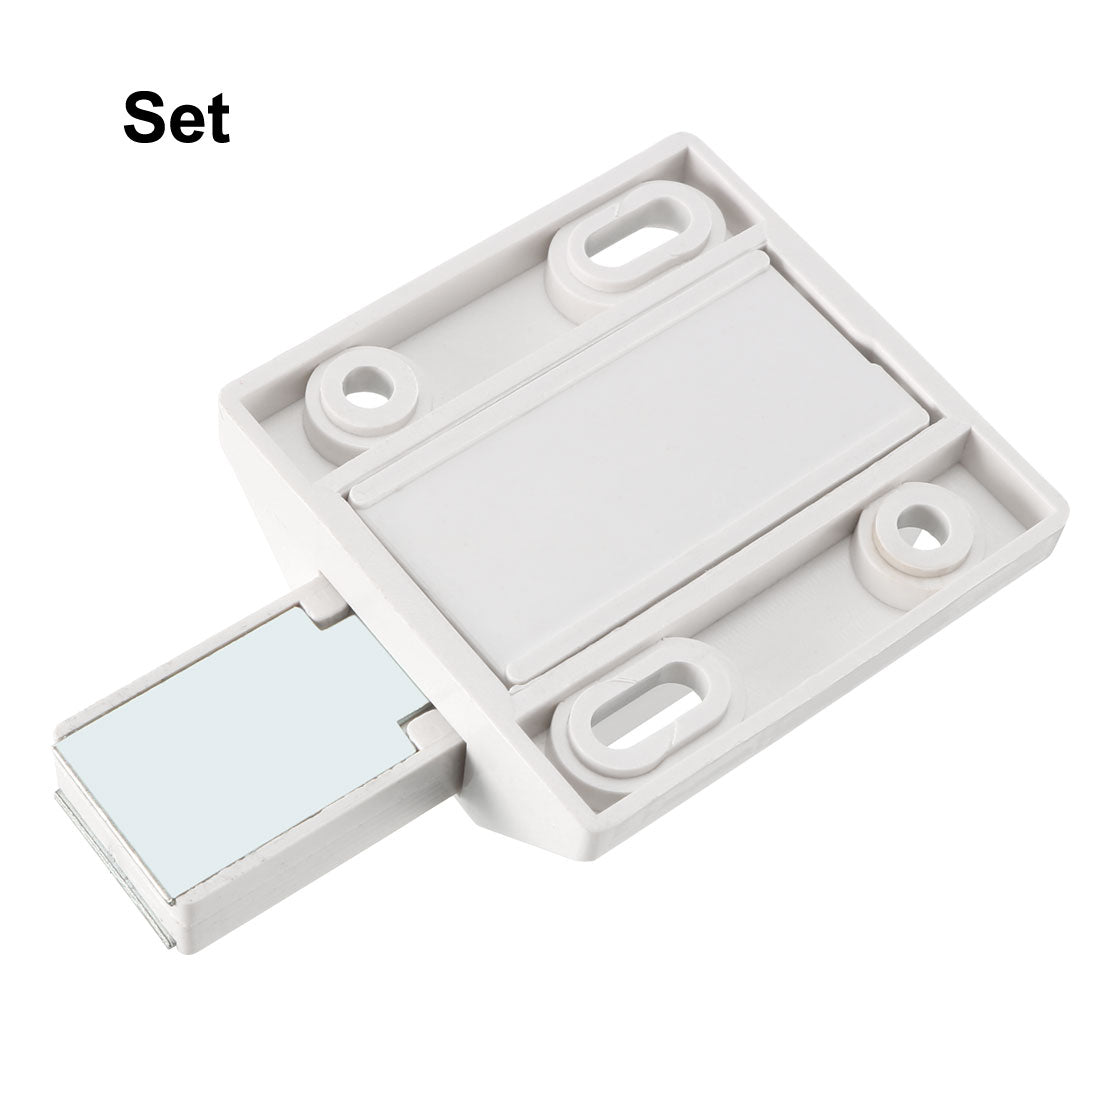 uxcell Uxcell 8-10mm Glass Door Magnetic Touch Catch Latch Closure Plastic White with Clamp Set